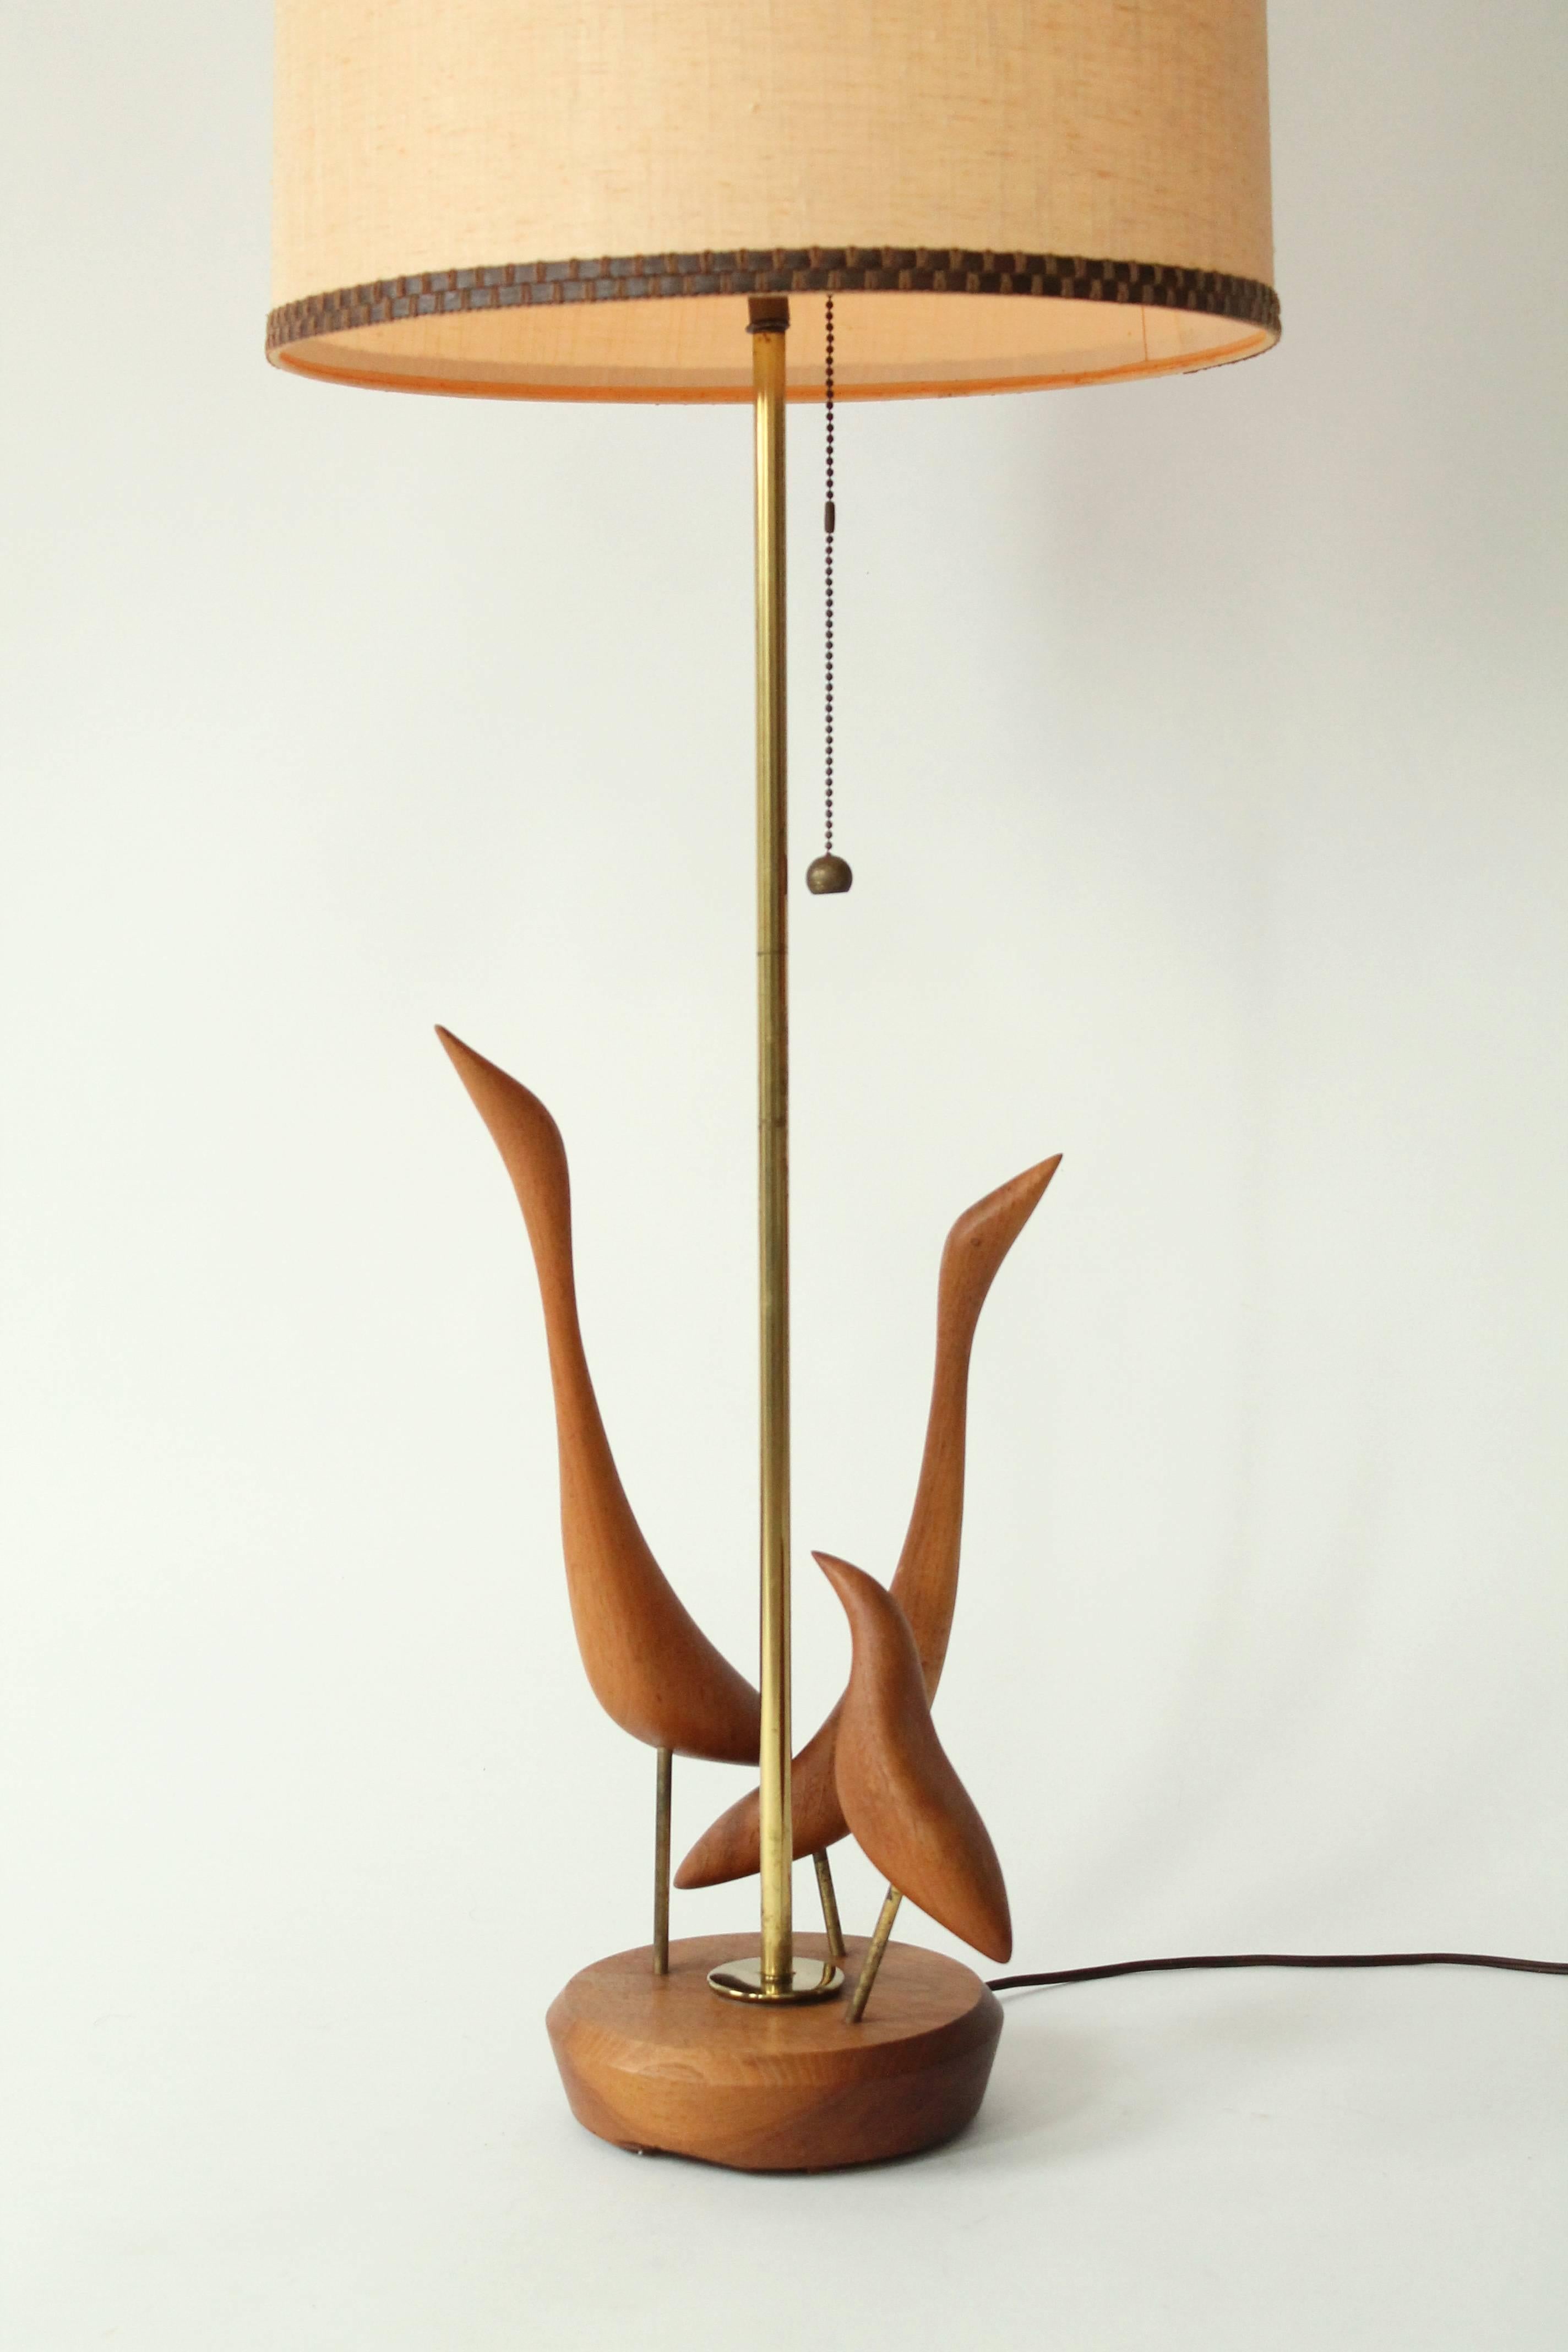 Plated Teak Table Lamp with Brass Trim , 1960s , Denmark